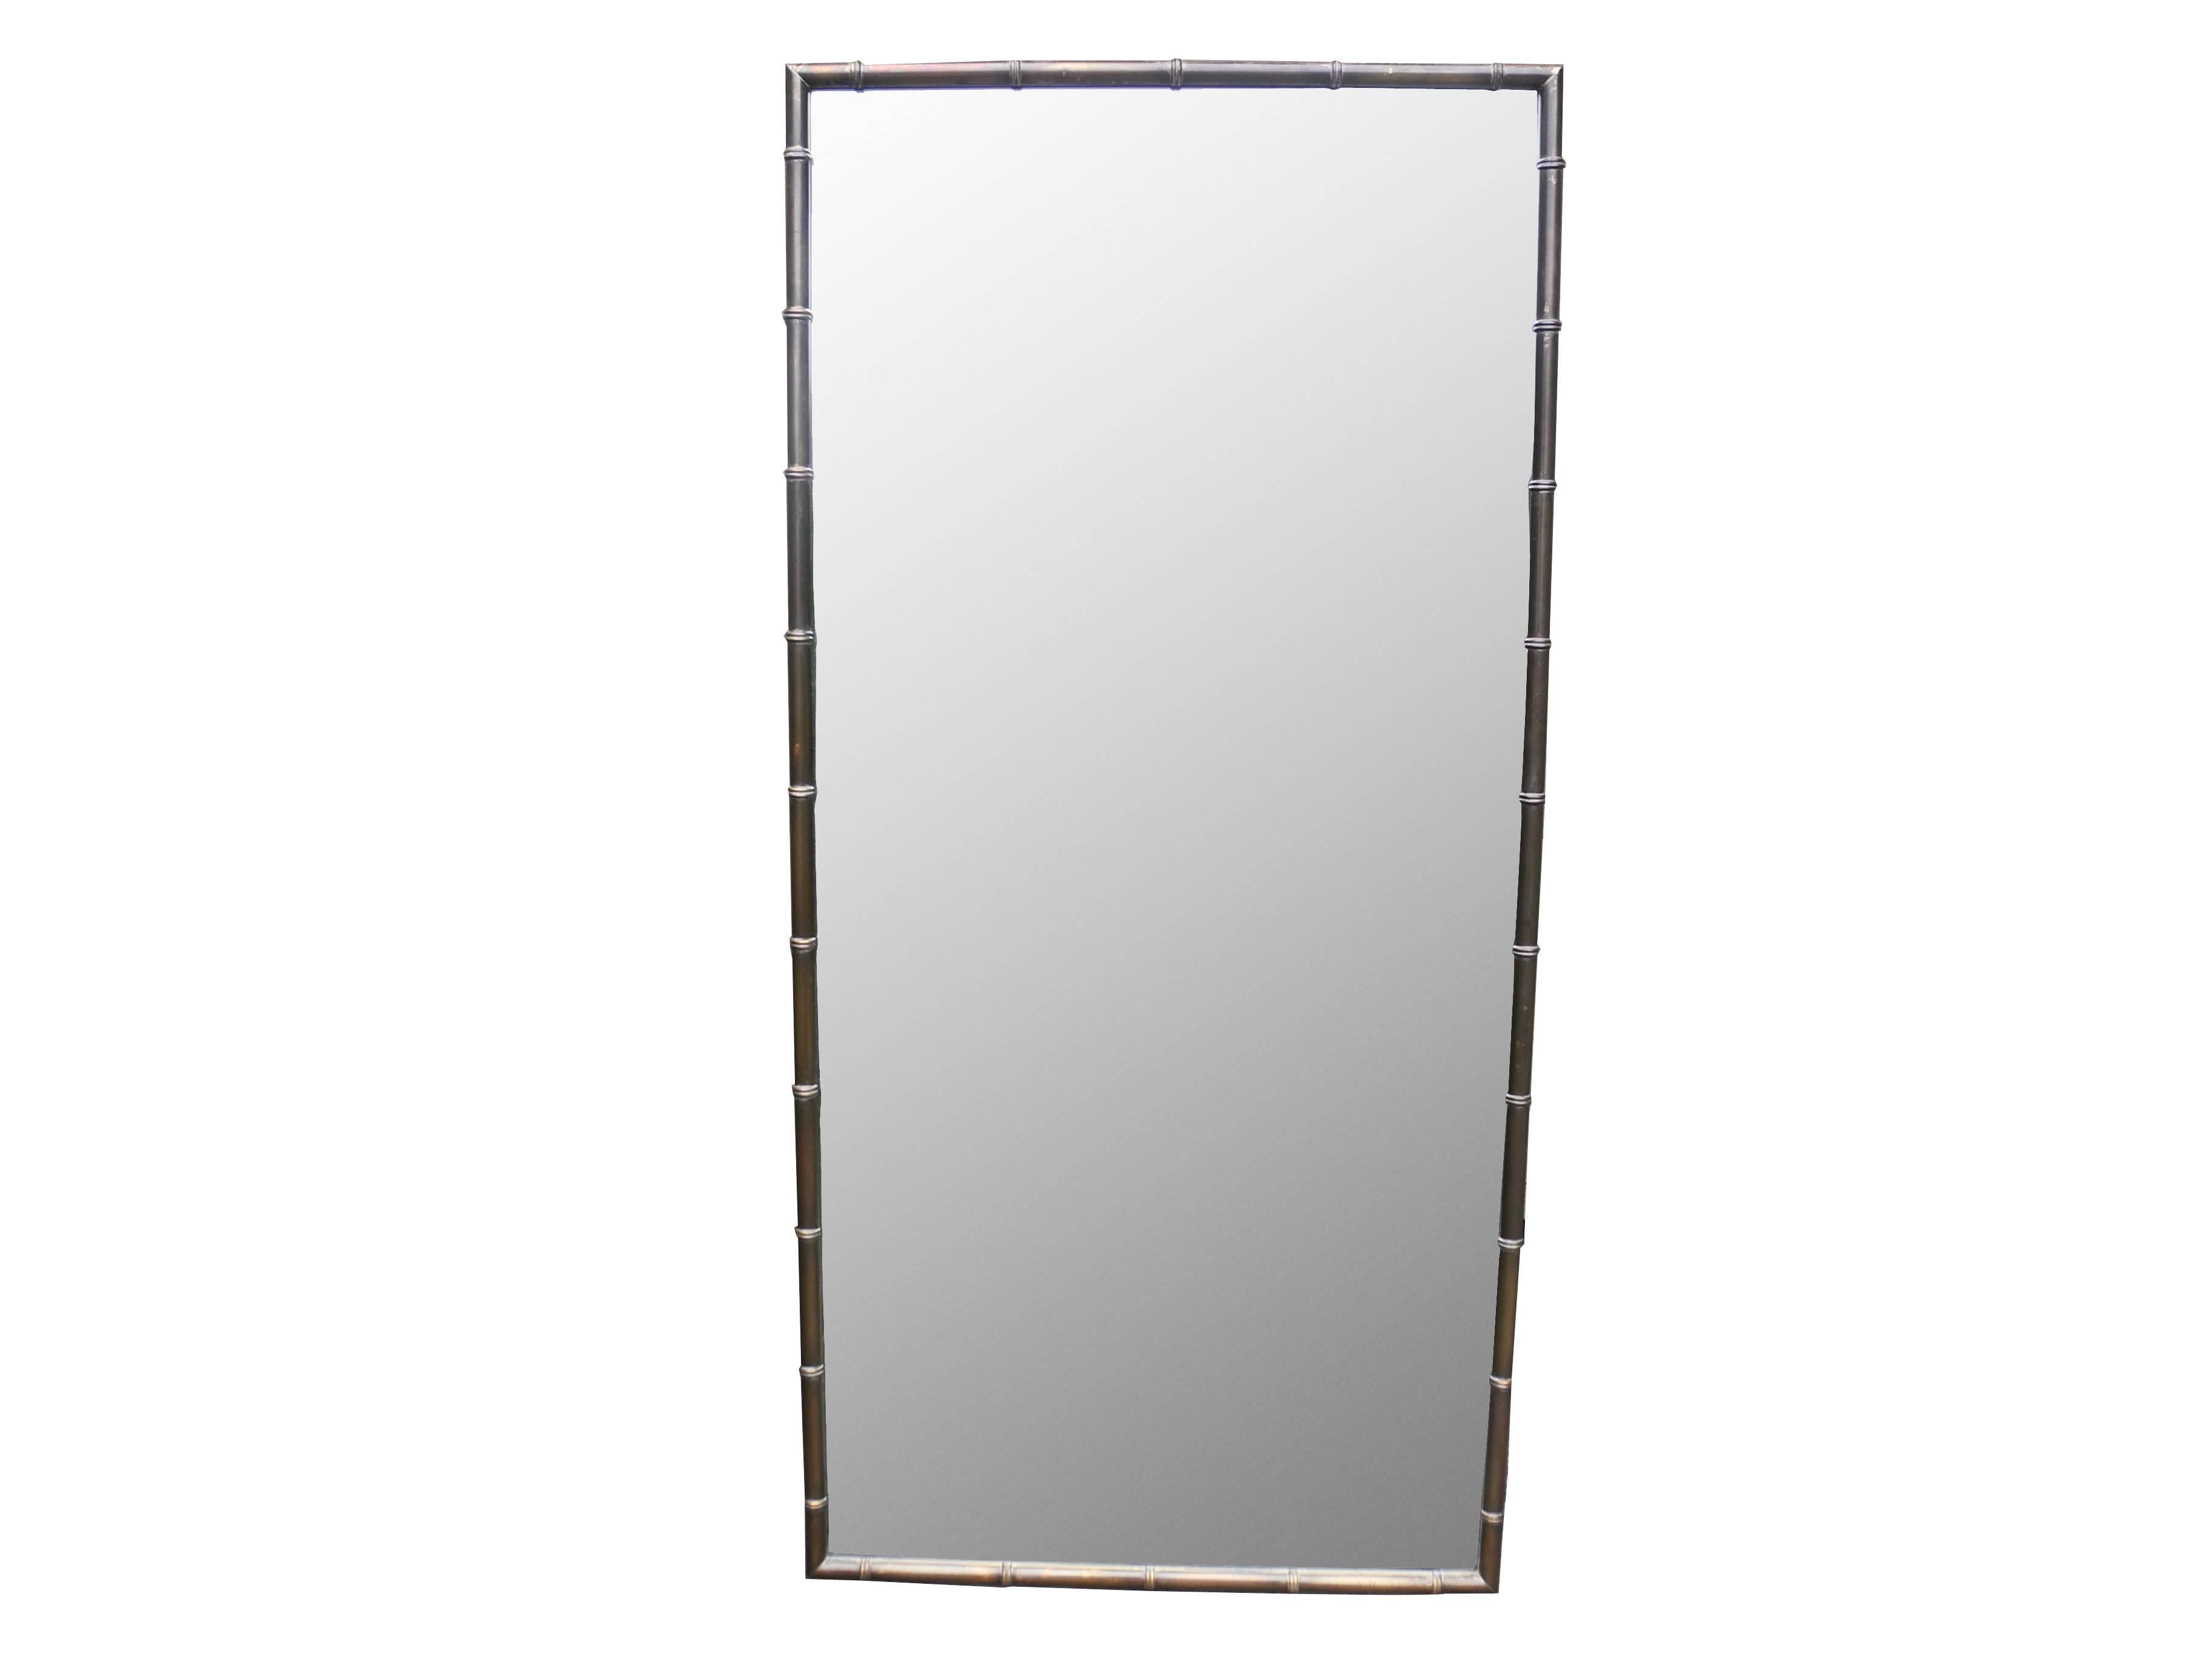 Solid brass faux bamboo mirror with excellent bronze patina.